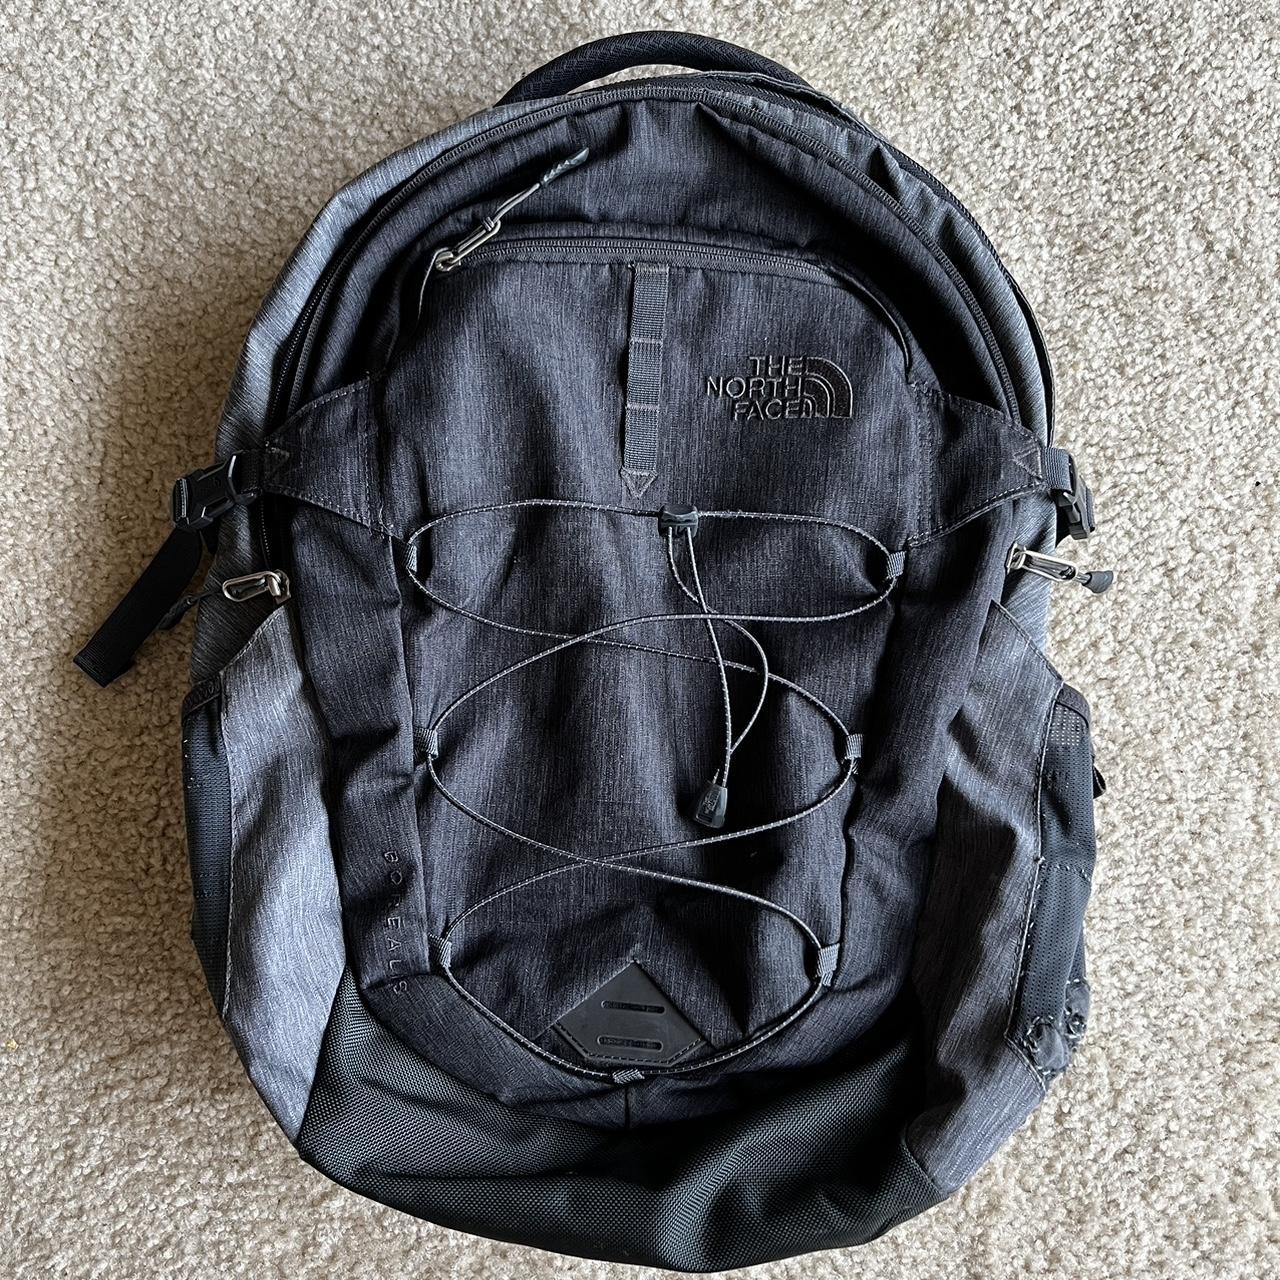 The North Face Men's Bag